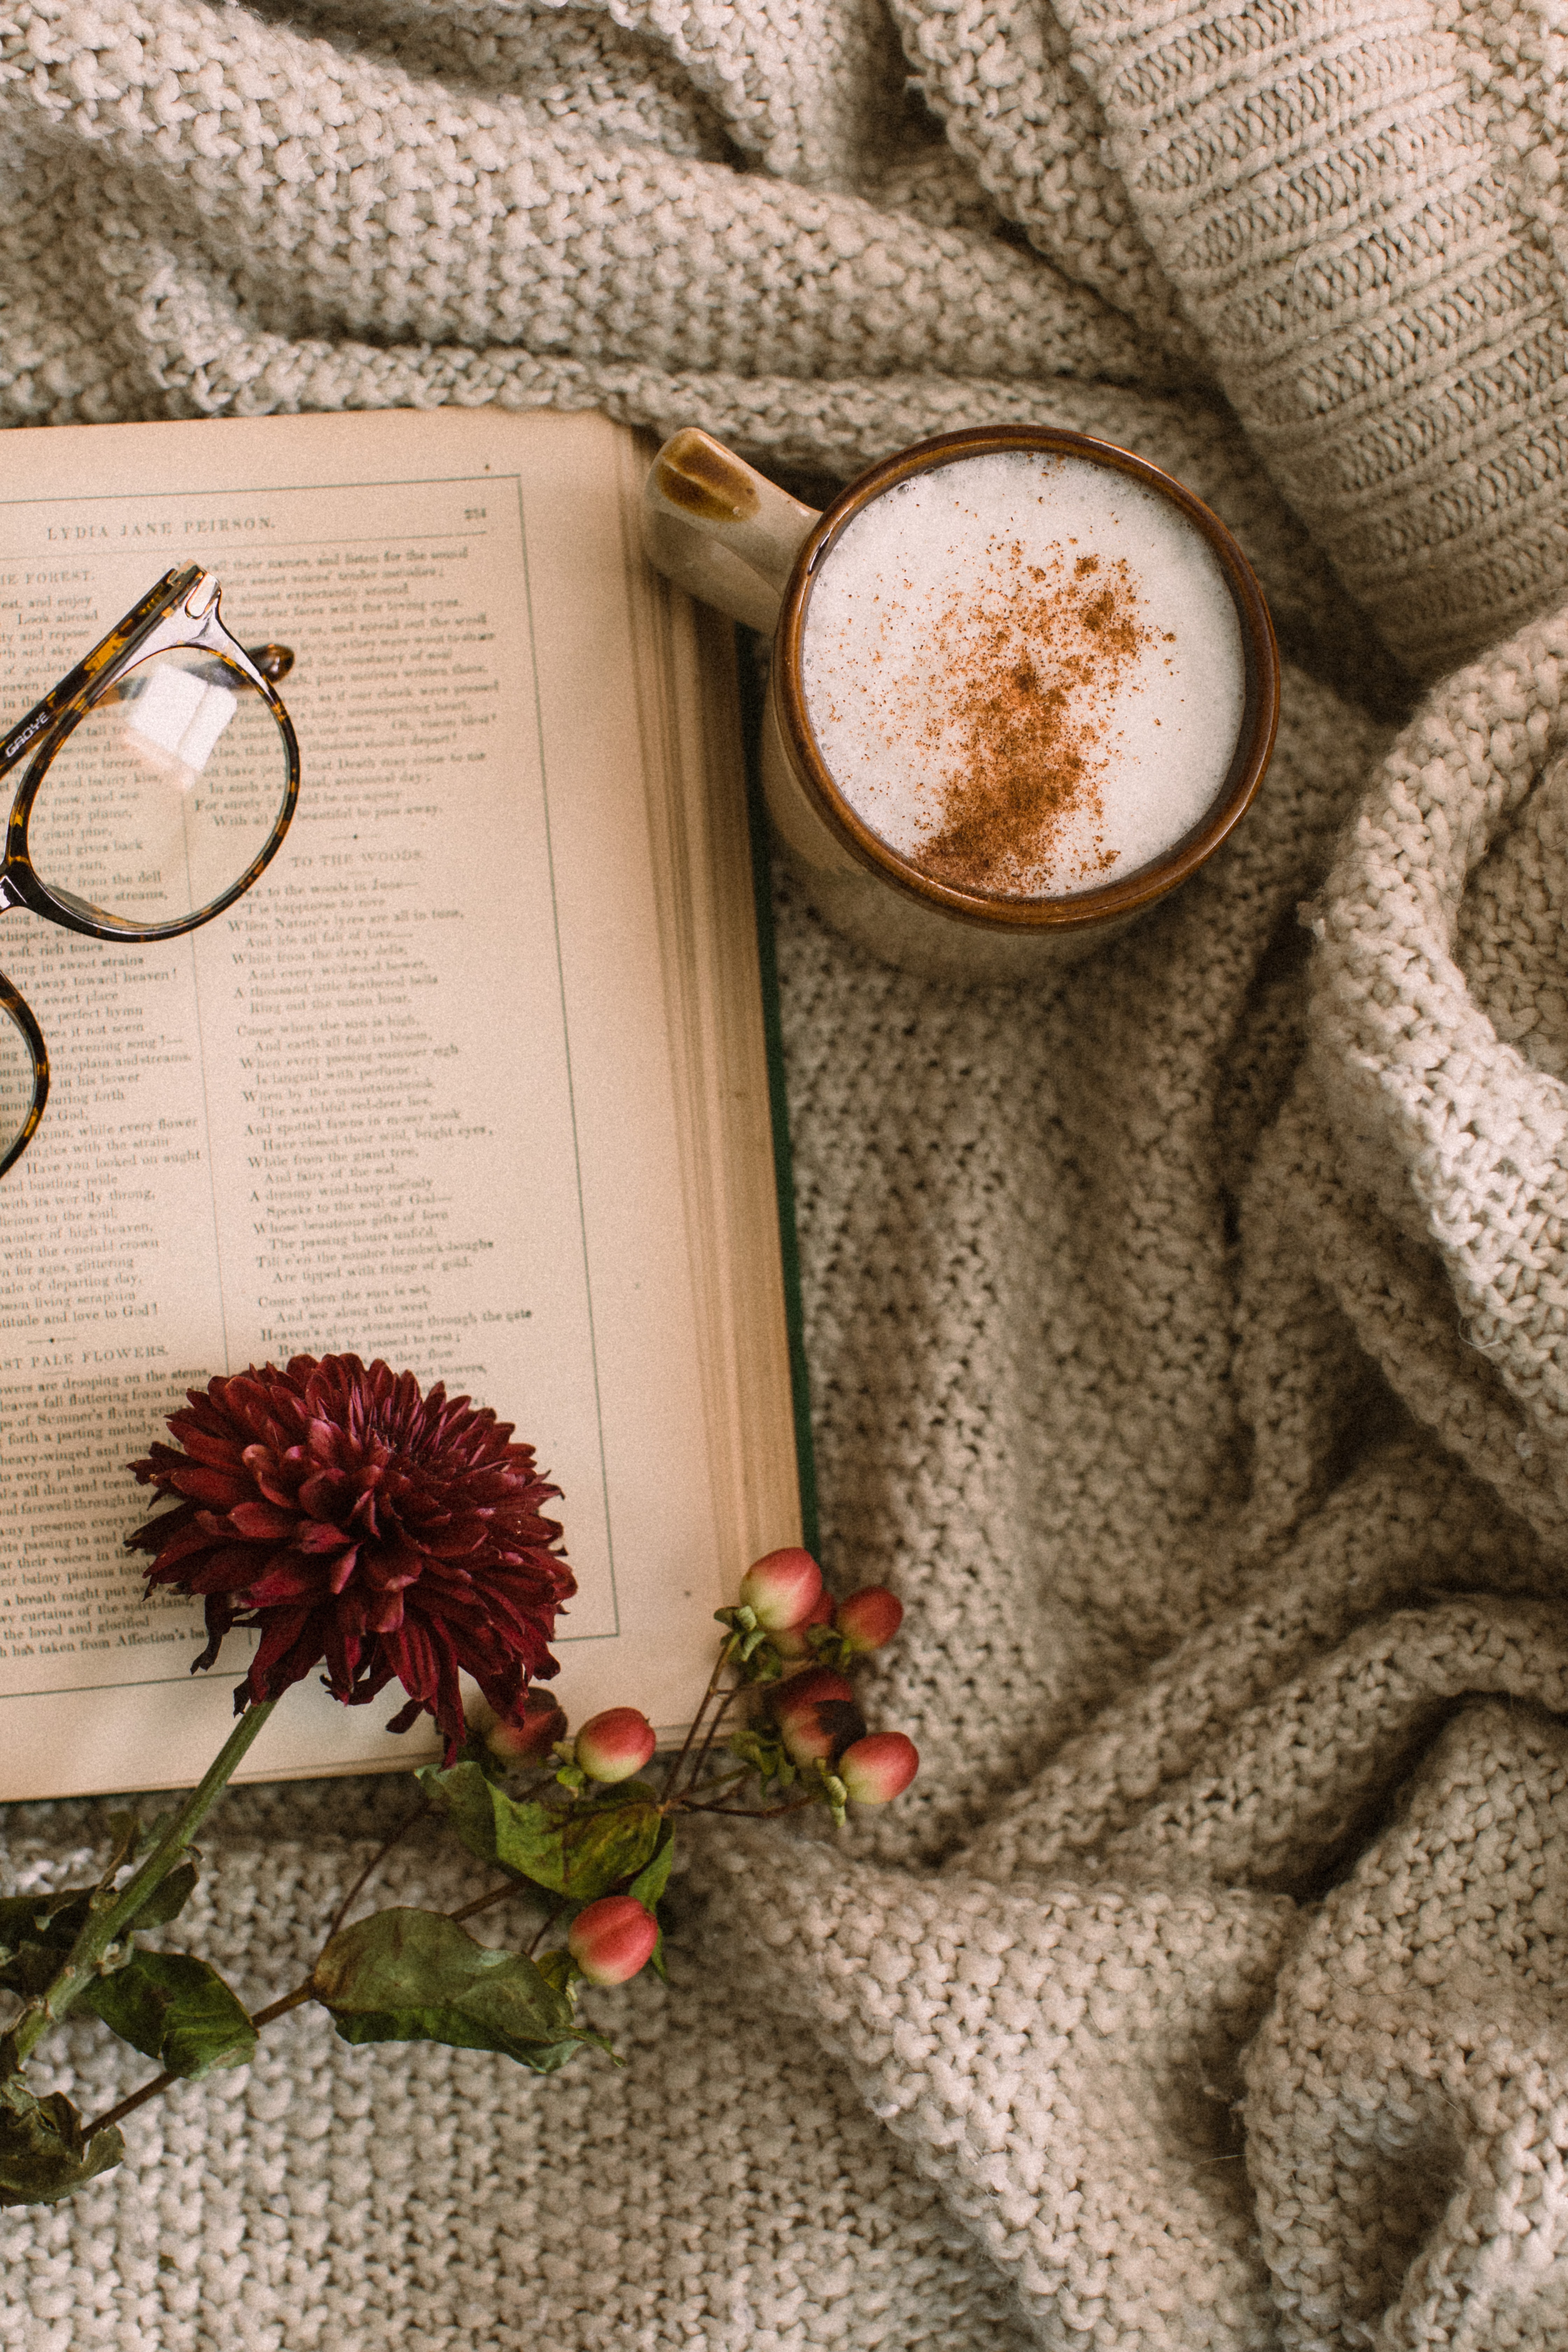 cup, spectacles, flowers, food, coffee, book, cappuccino, glasses, mug